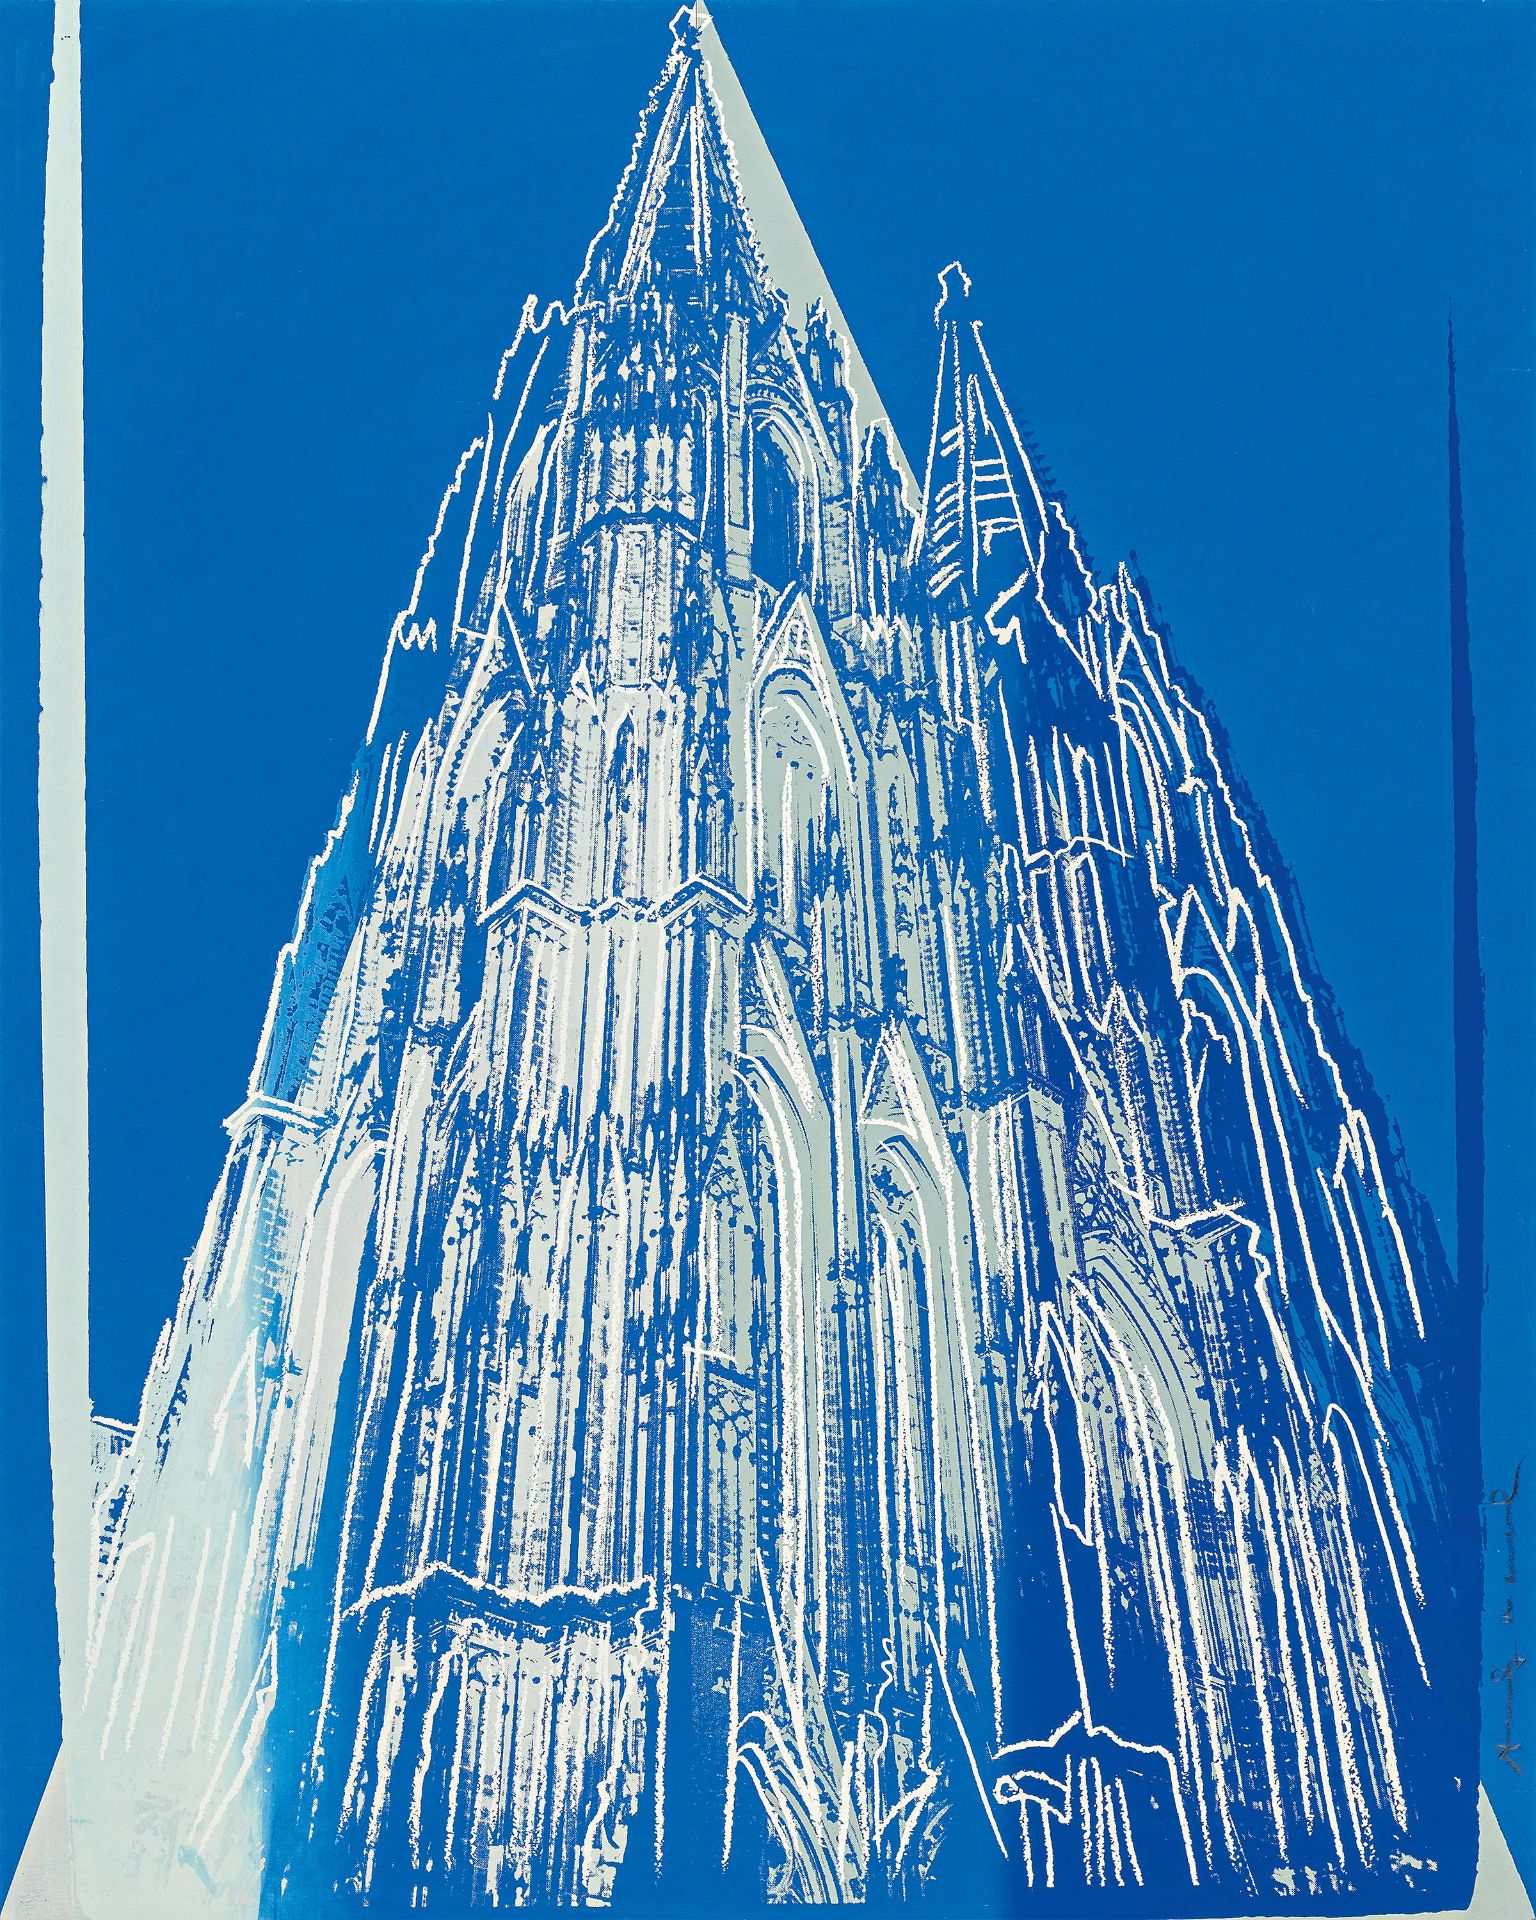 Warhol, Andy1928 Pittsburgh - 1987 New YorkCologne Cathedral. 1985. Colour silkscreen on Lenox